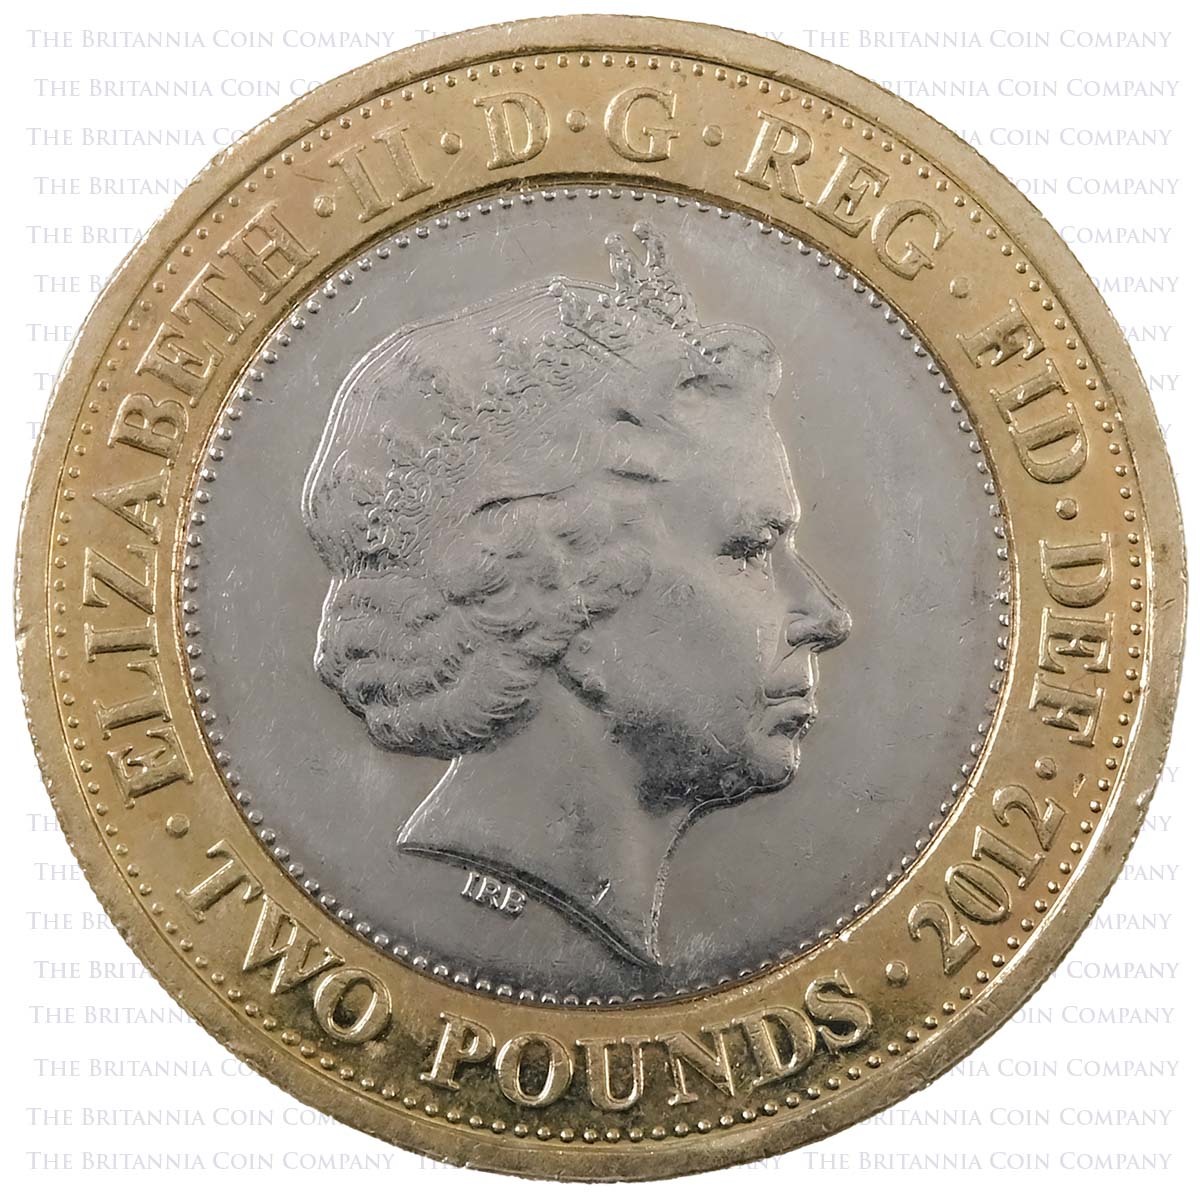 2012 Charles Dickens Circulated Two Pound Coin Obverse